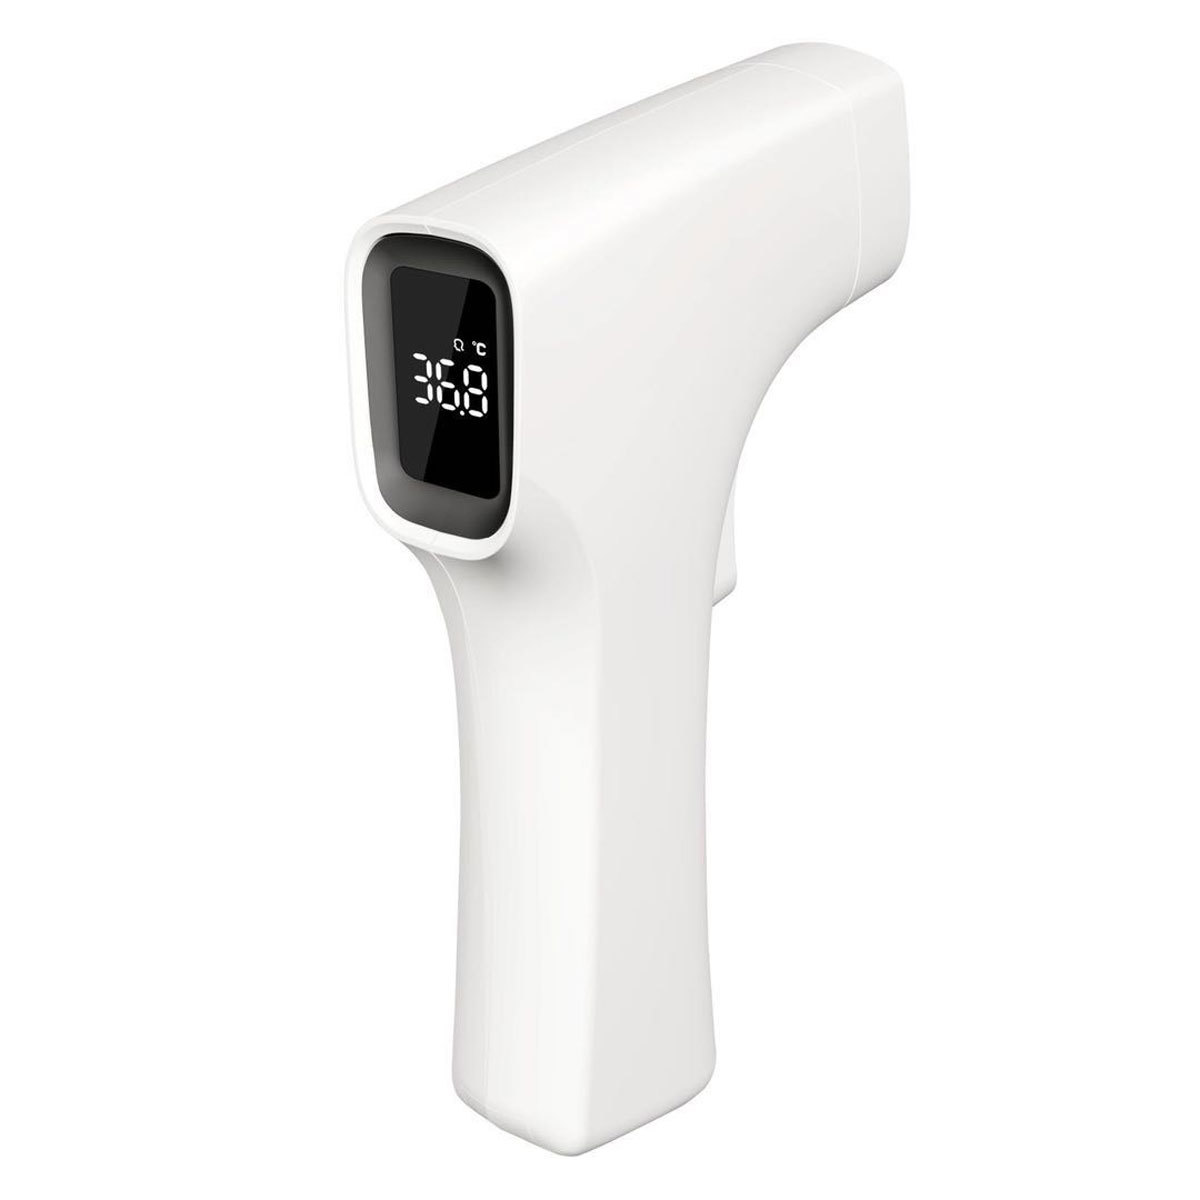 Dr Talbot's Infrared Non-Contact Thermometer 800000